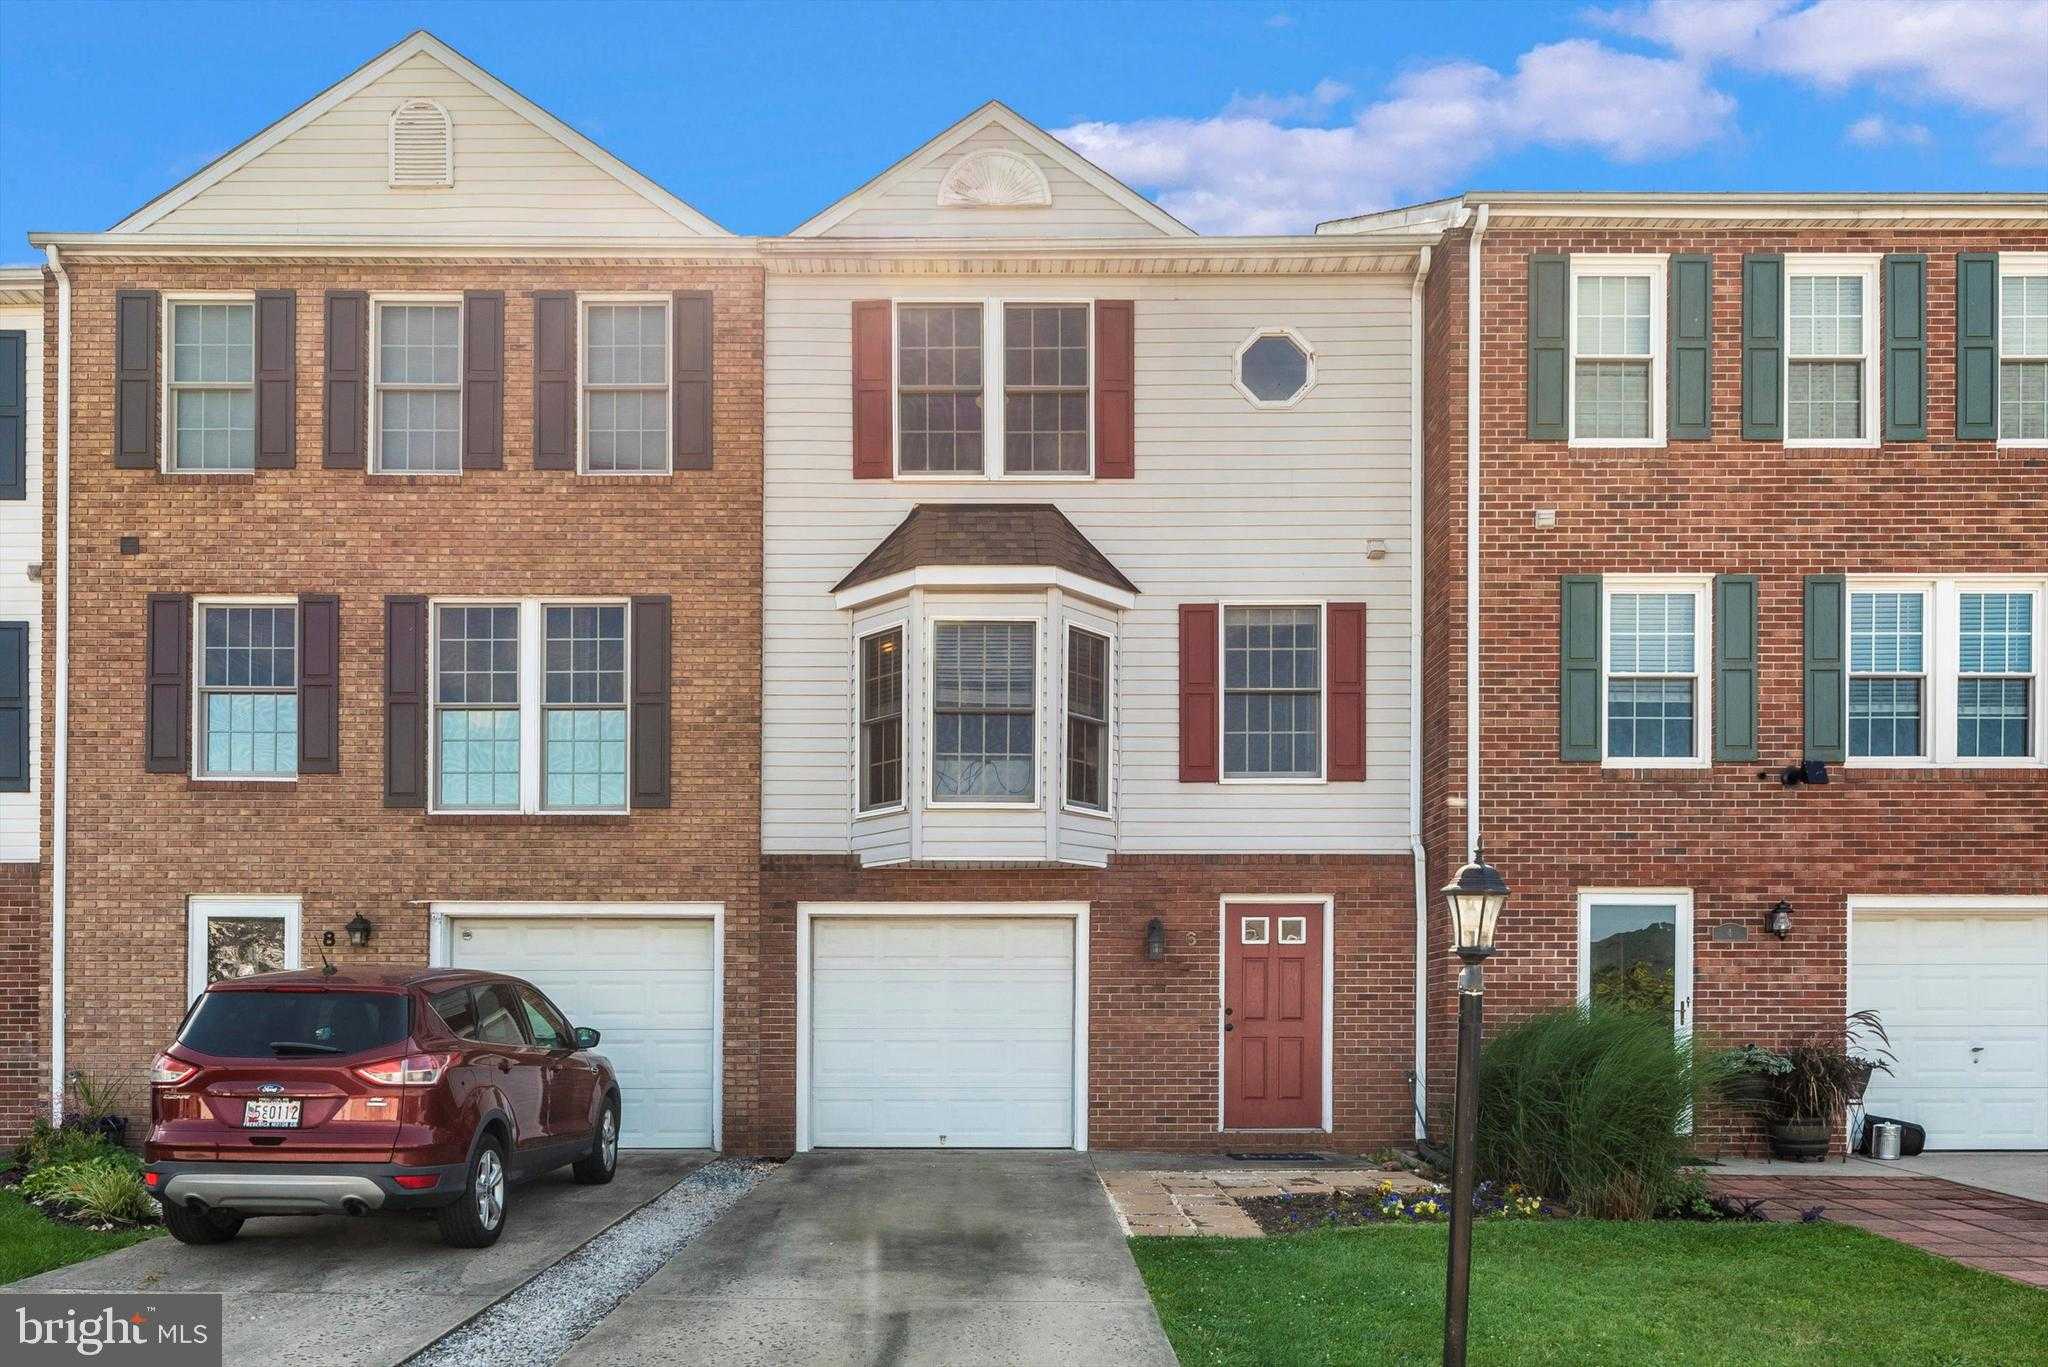 View THURMONT, MD 21788 townhome